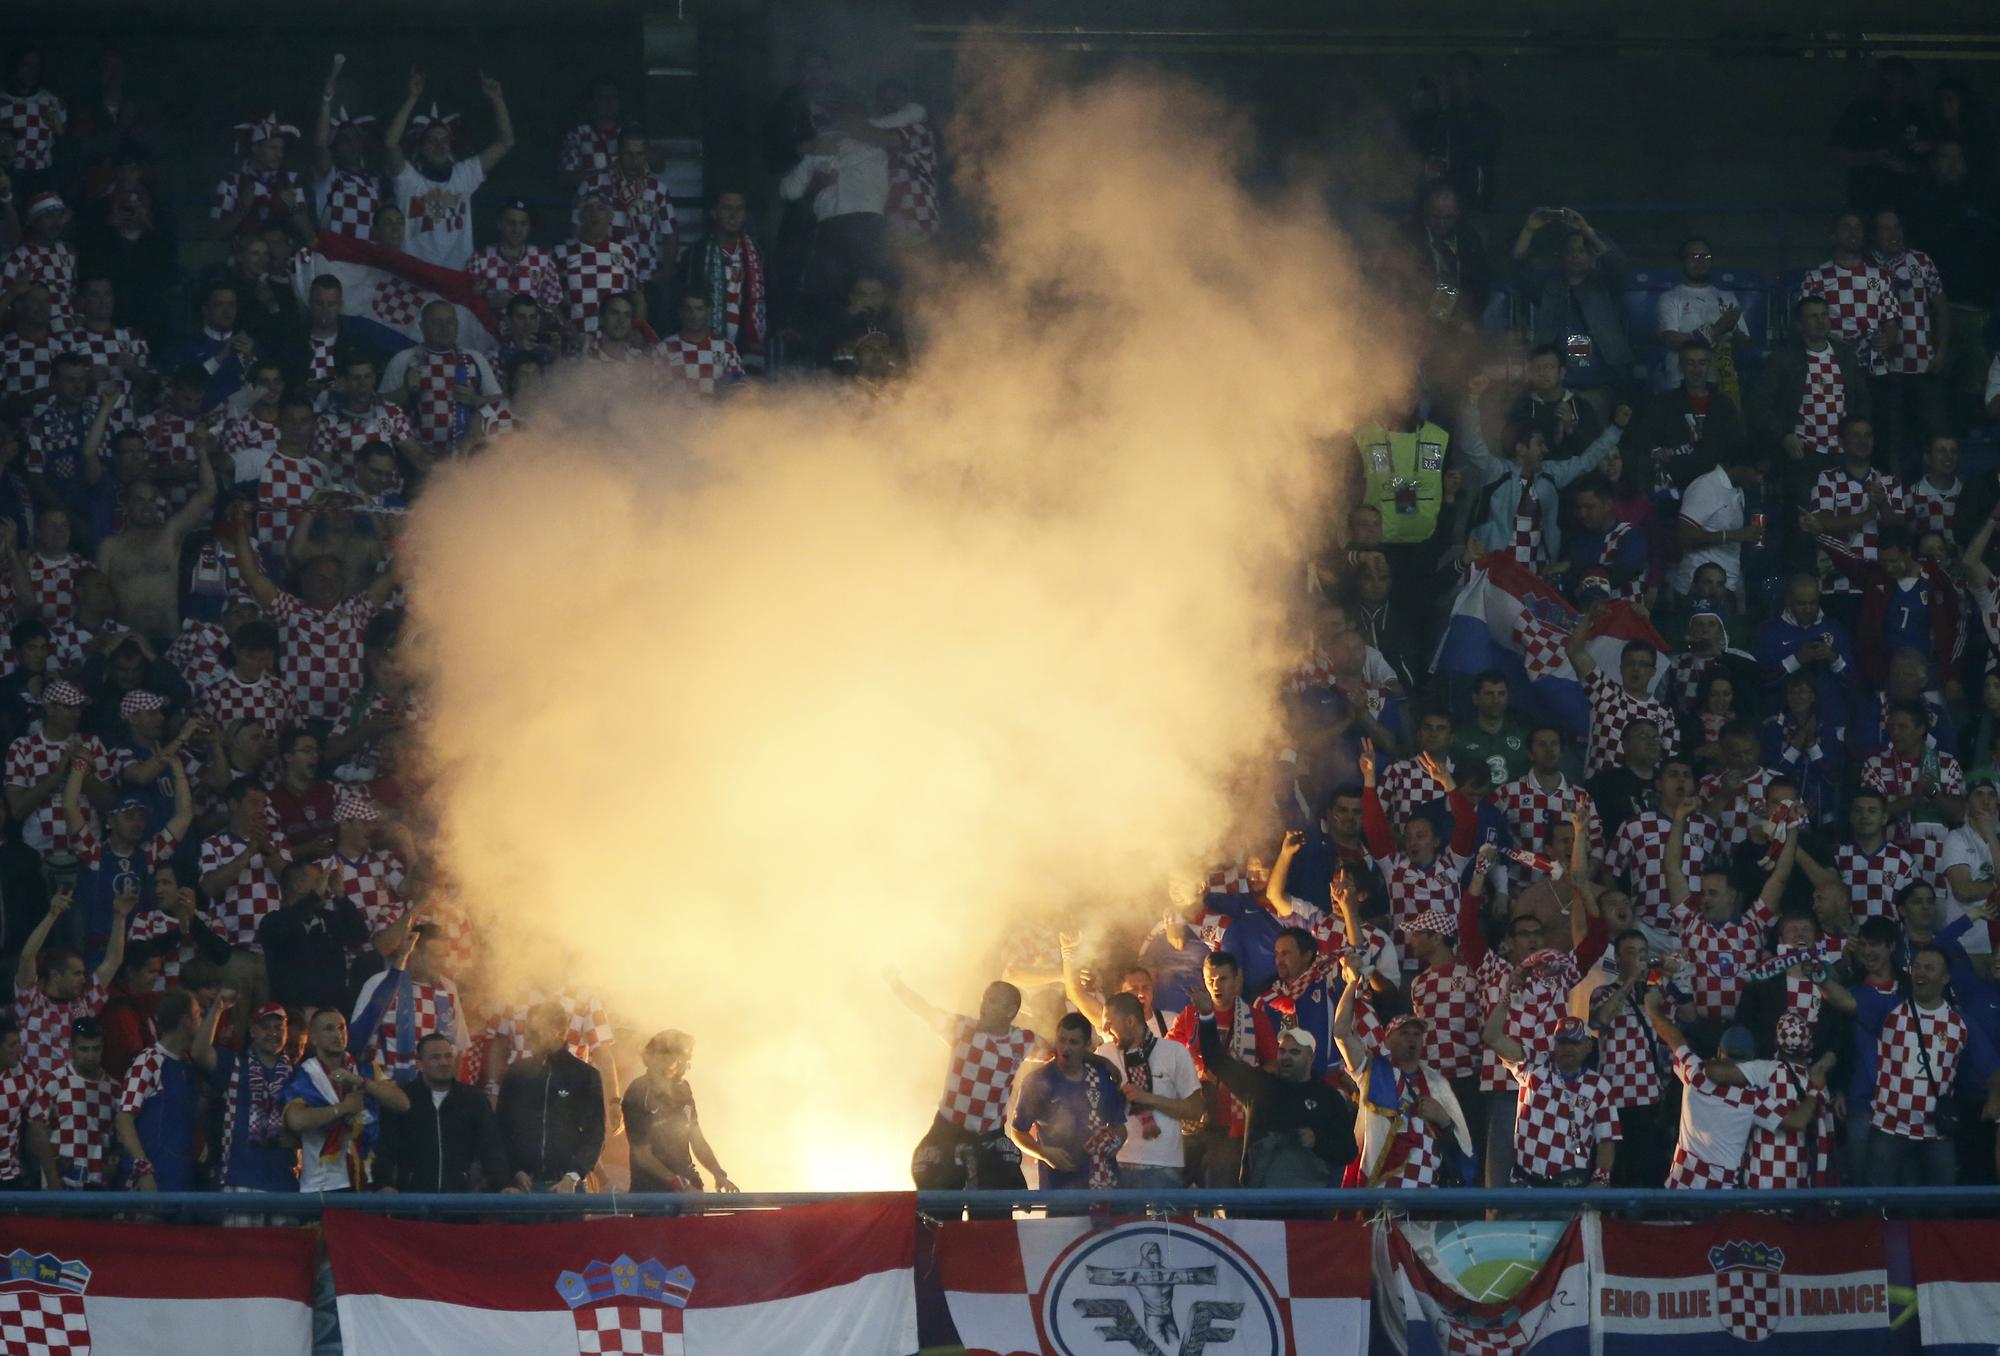 Croatia's fans celebrate a goal against Ireland during their Group C Euro 2012 soccer match at the City stadium in Poznan, June 10, 2012. REUTERS/Kacper Pempel (POLAND - Tags: SPORT SOCCER) [REUTERS - Kacper Pempel]